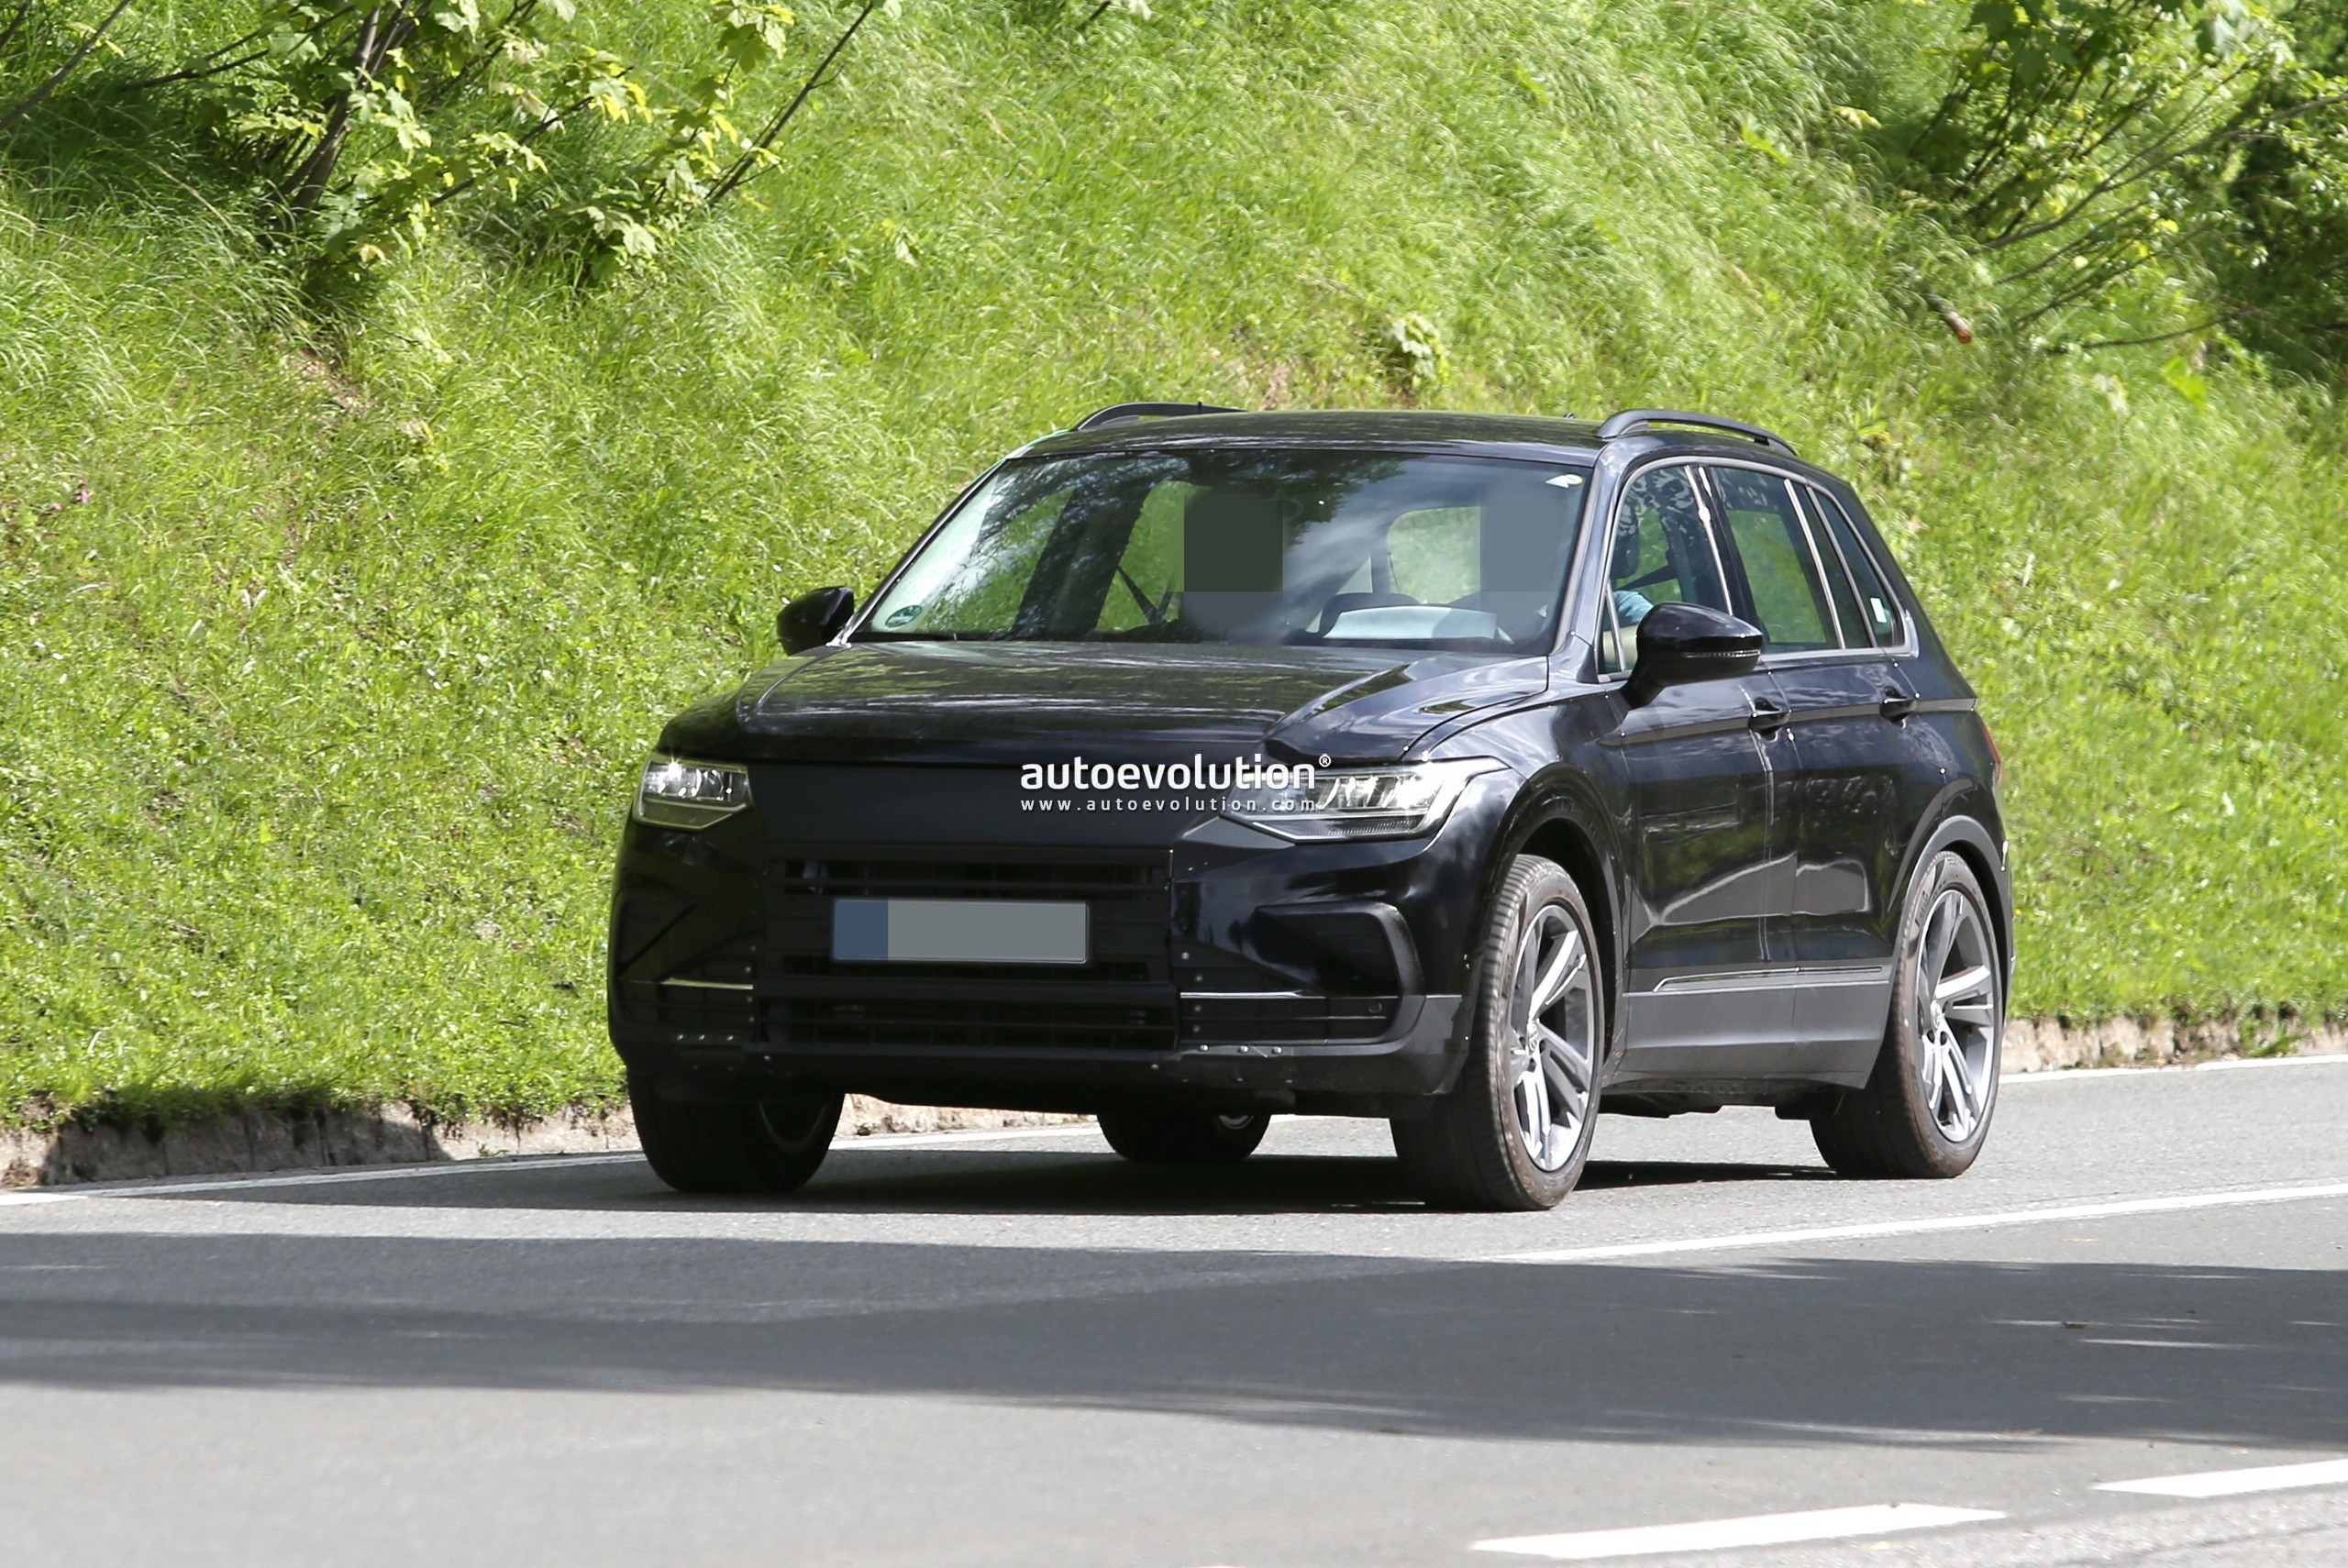 2025 Vw Tiguan Spied With Closed Off Grille Everything About It Says